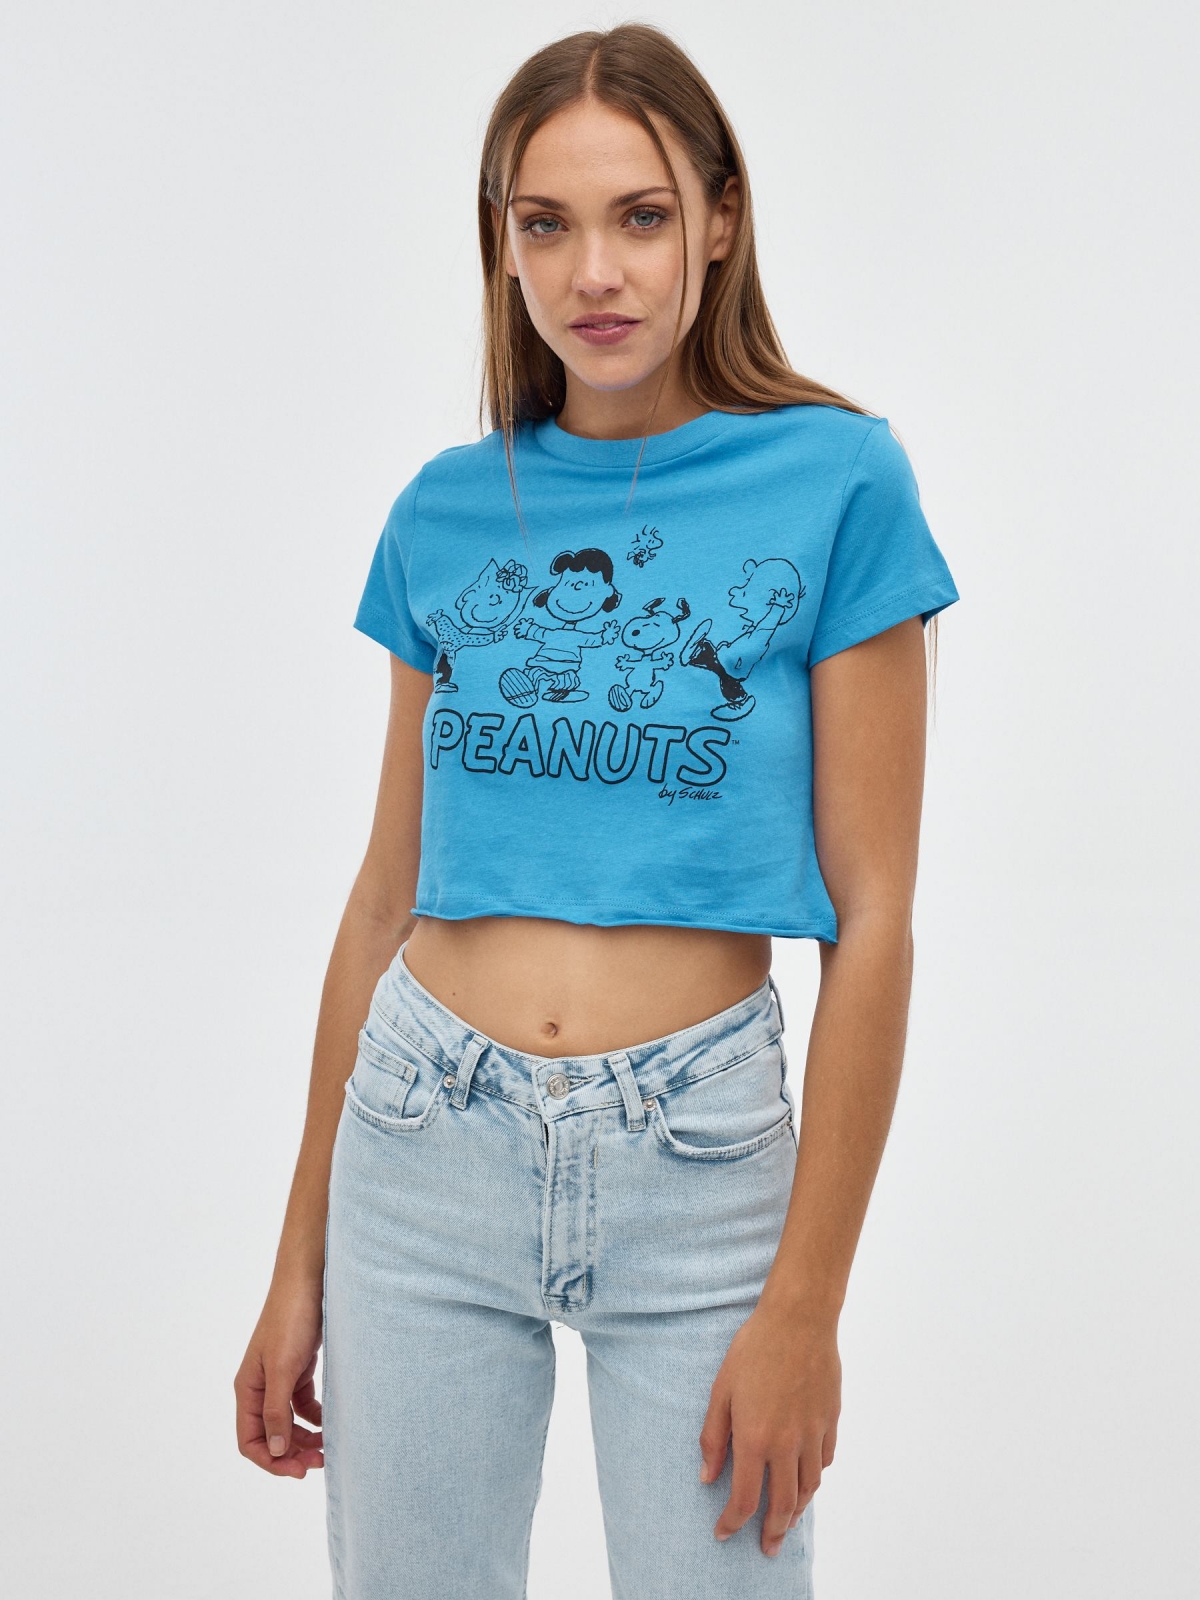 Peanuts t-shirt blue middle front view